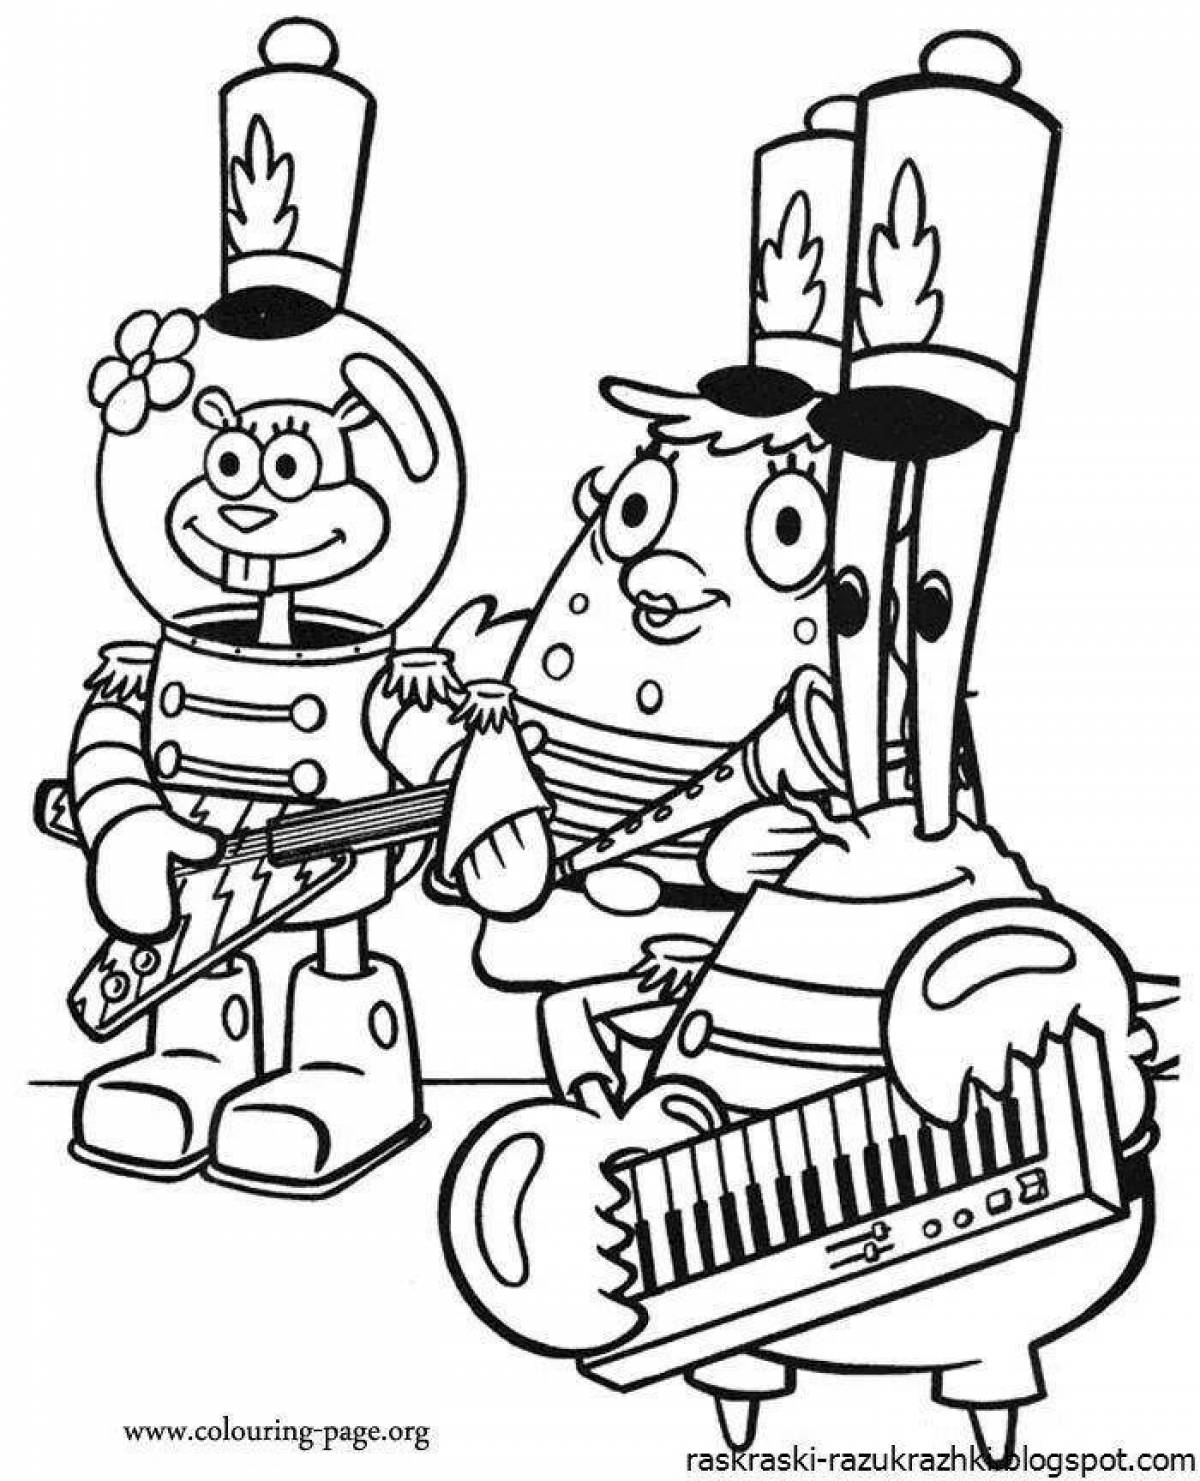 Sandy's animated coloring page